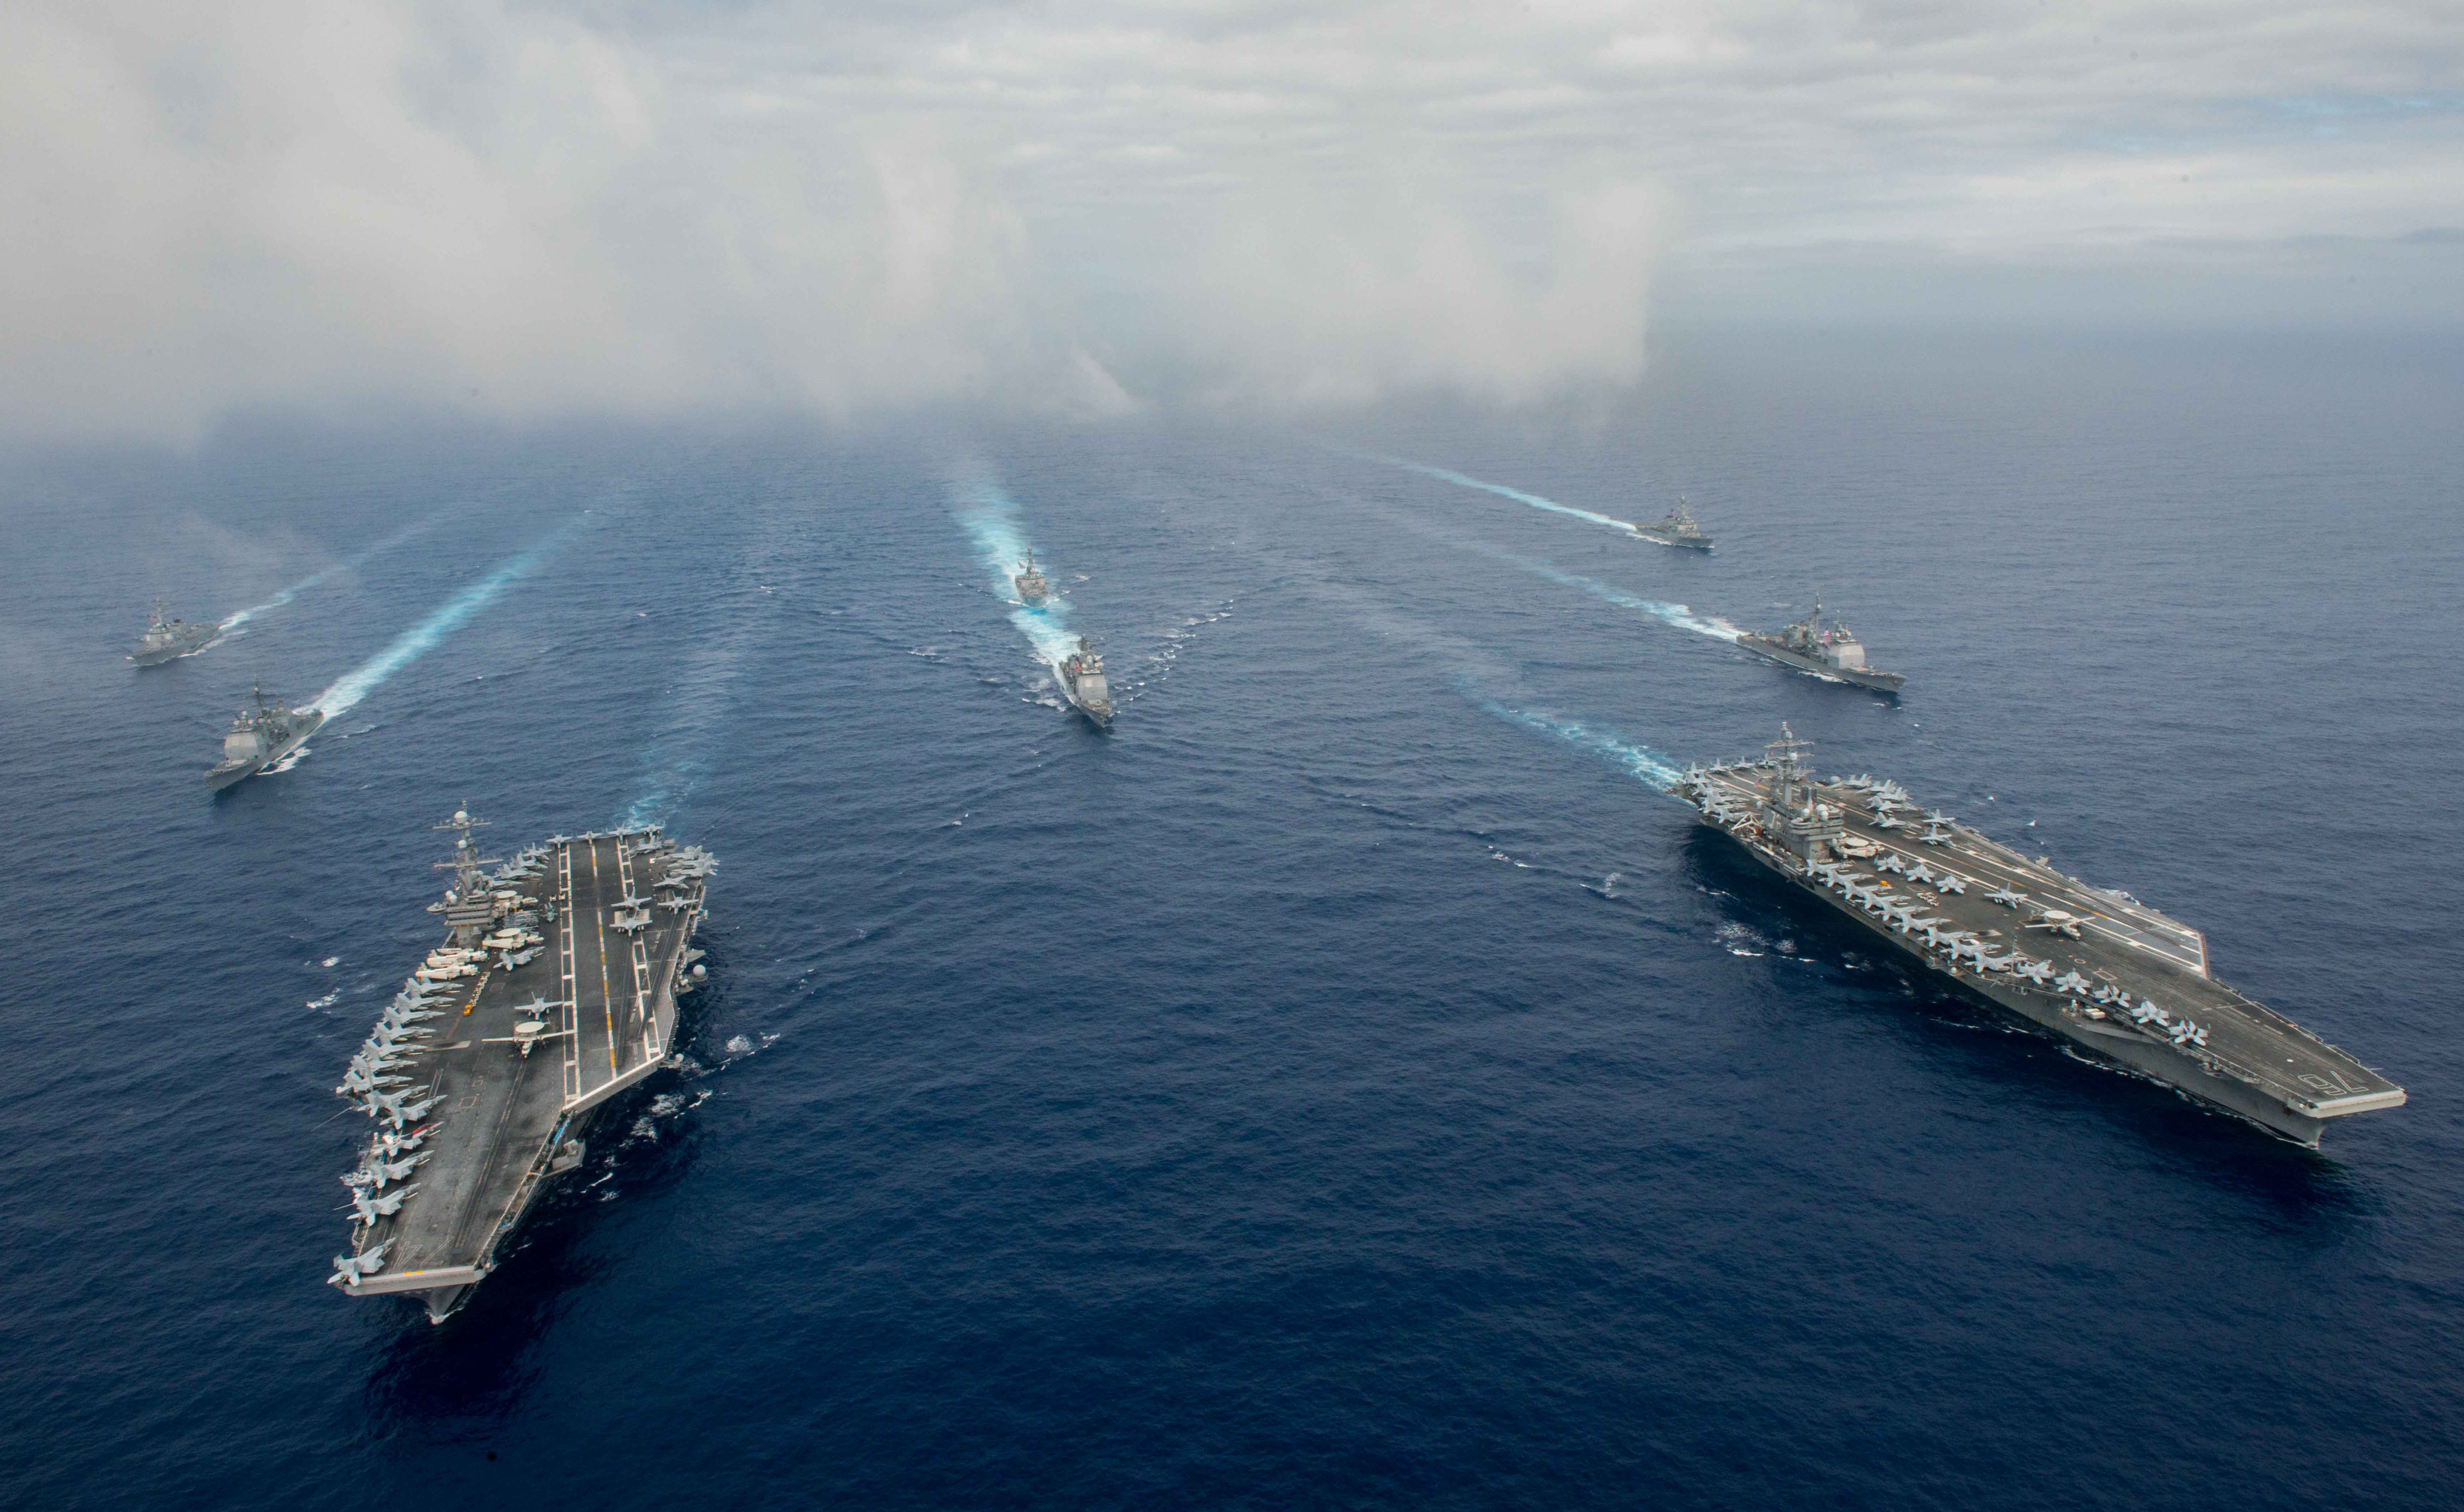 The USS John C. Stennis and USS Ronald Reagan conduct operations in the U.S. 7th Fleet area of operations on June 18, 2016. (Specialist 3rd Class Jake Greenberg—U.S. Navy/Getty Images)